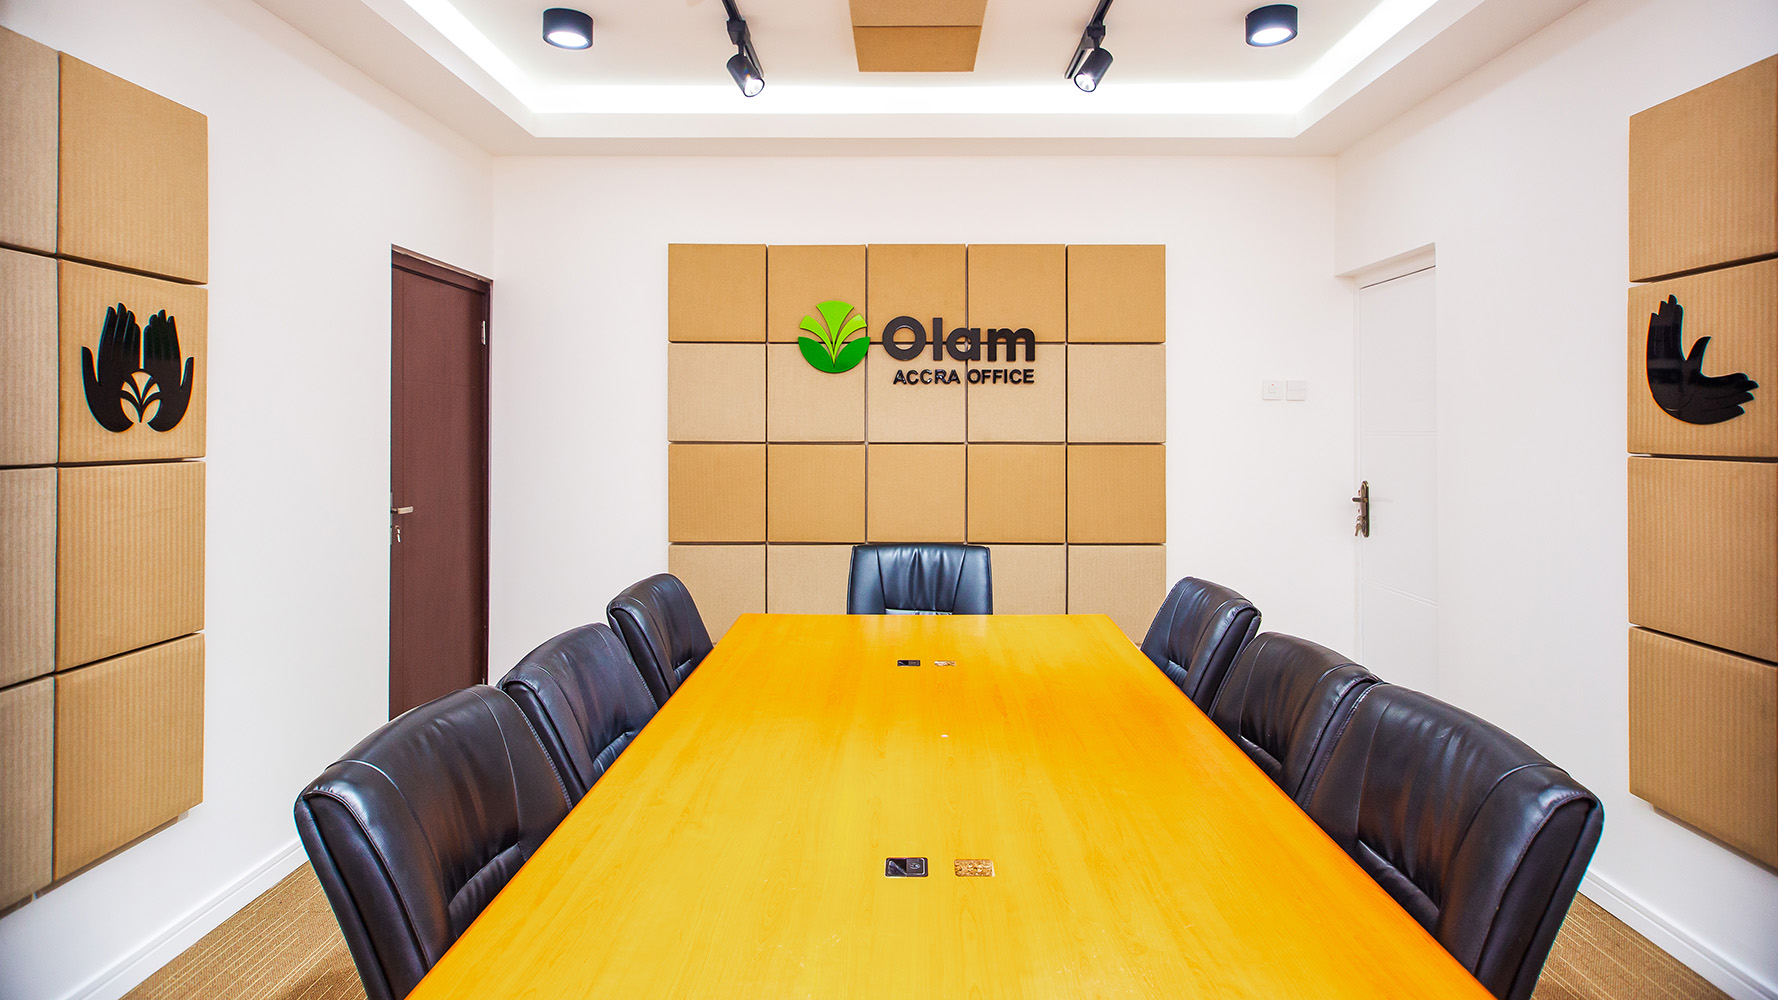 Olam – Accra Office - Space Turnkey Solutions - Design & Build Firm - Ghana